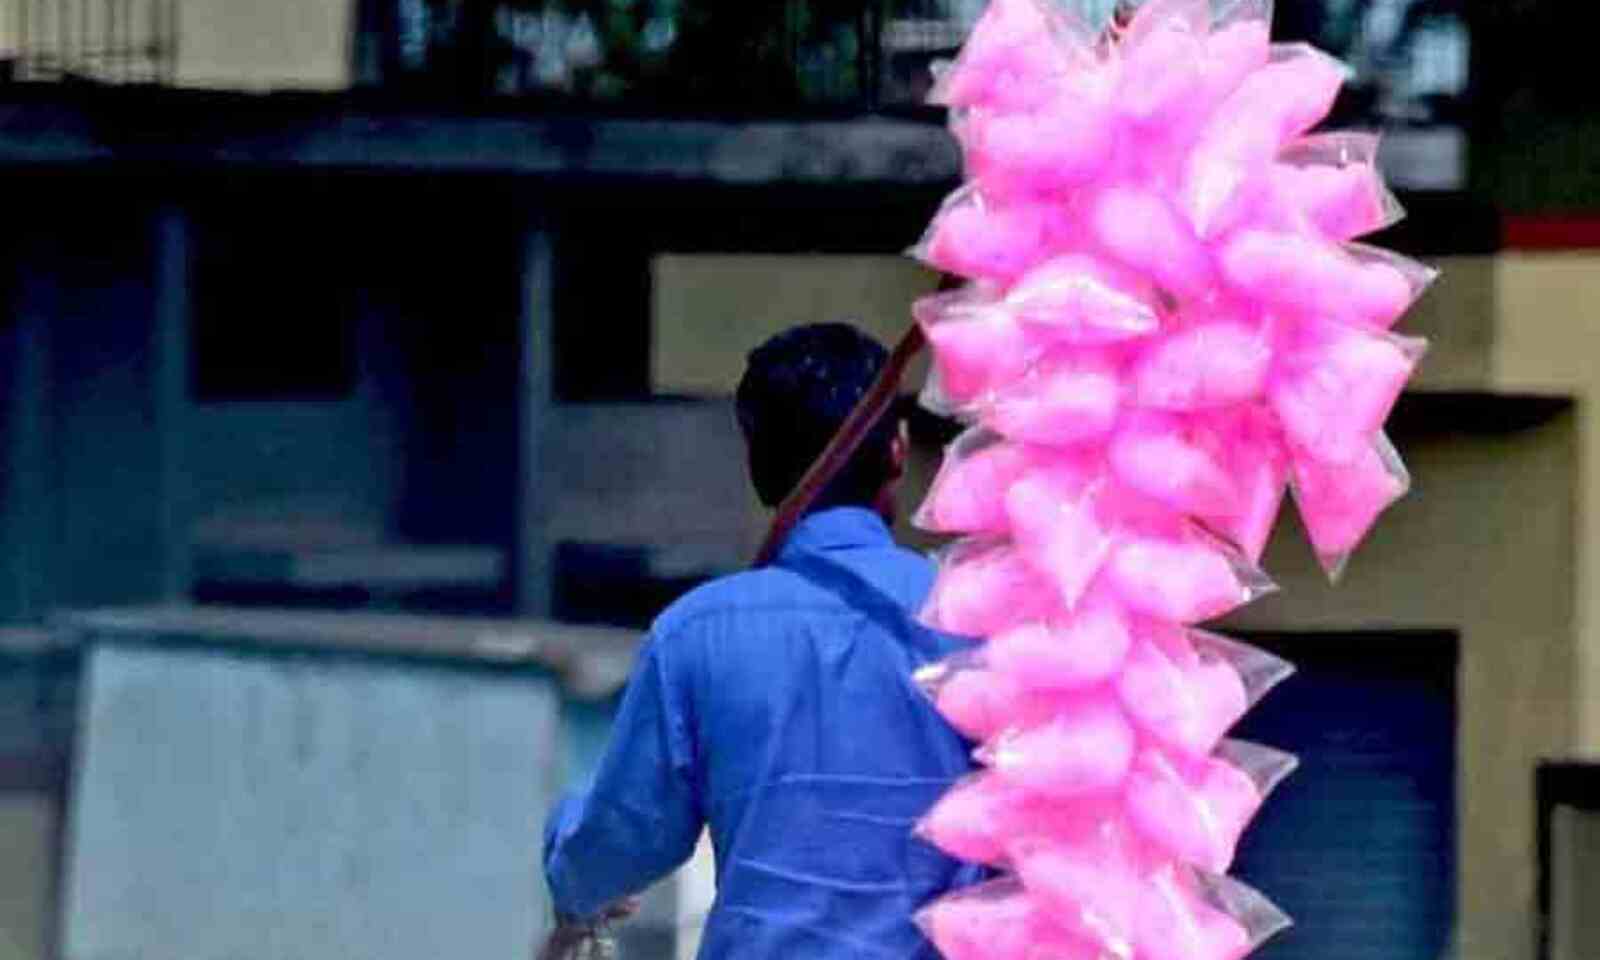 puducherry-banned-cotton-candy-toxic-substance-was-being-used-in-making-cotton-candy-ban-imposed